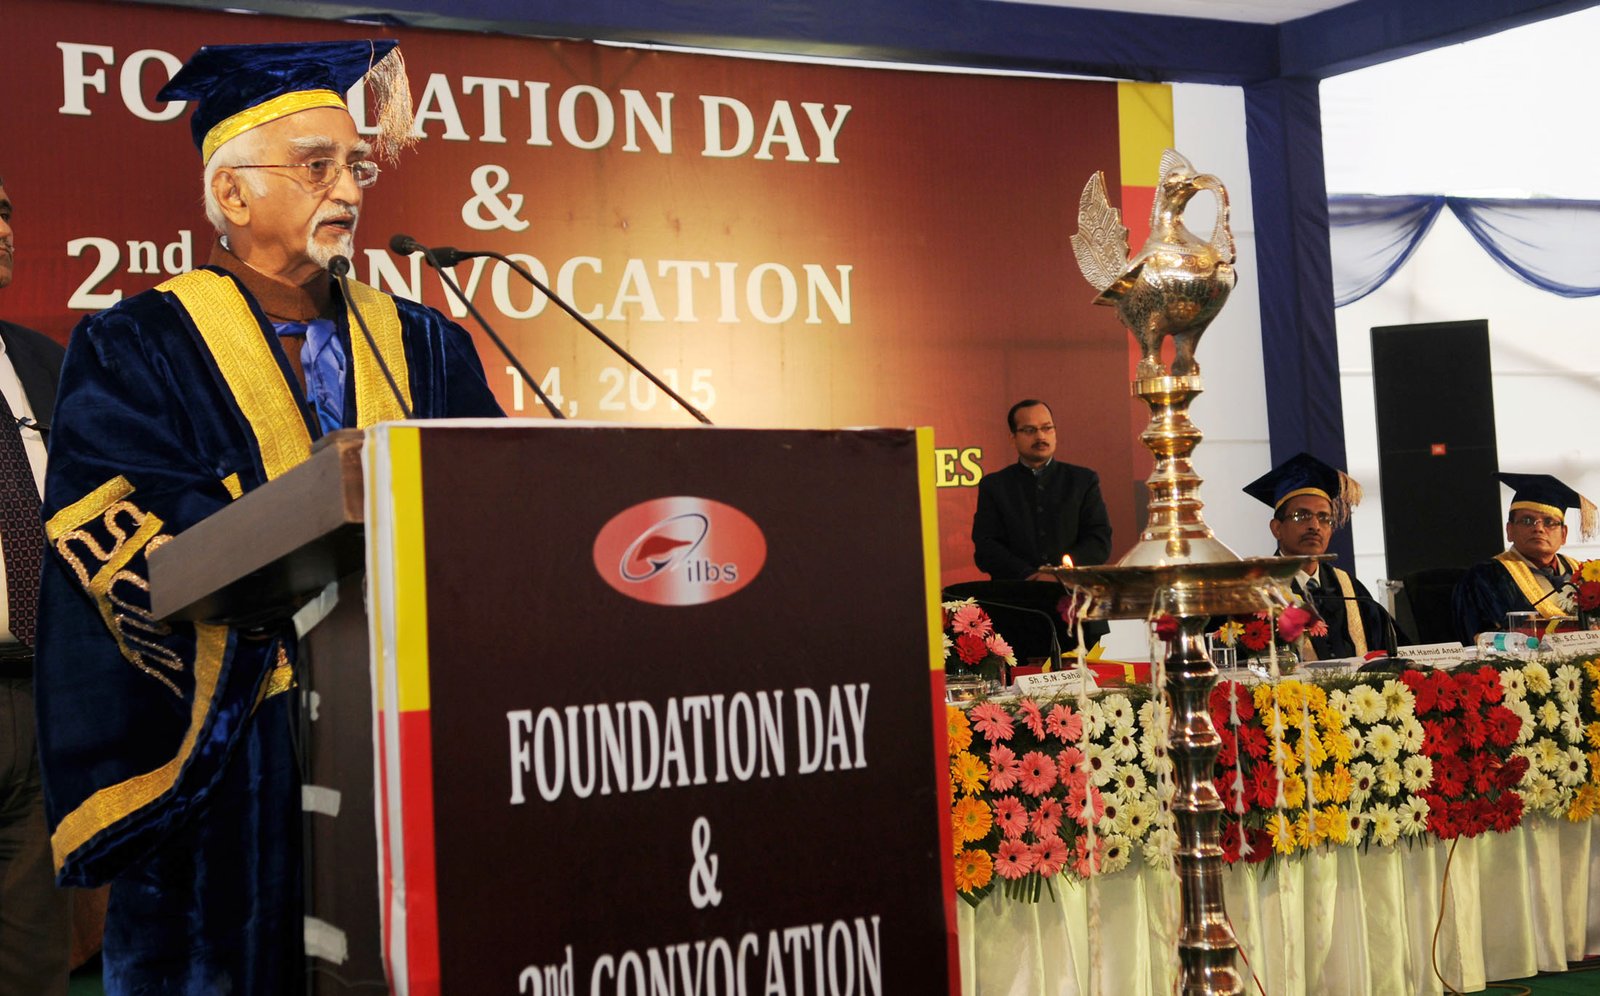 The Vice President, Shri Mohammad Hamid Ansari addressing at the 5th Foundation Day and 2nd Convocation ceremony of the Institute of Liver and Biliary Sciences, in New Delhi on January 14, 2015.